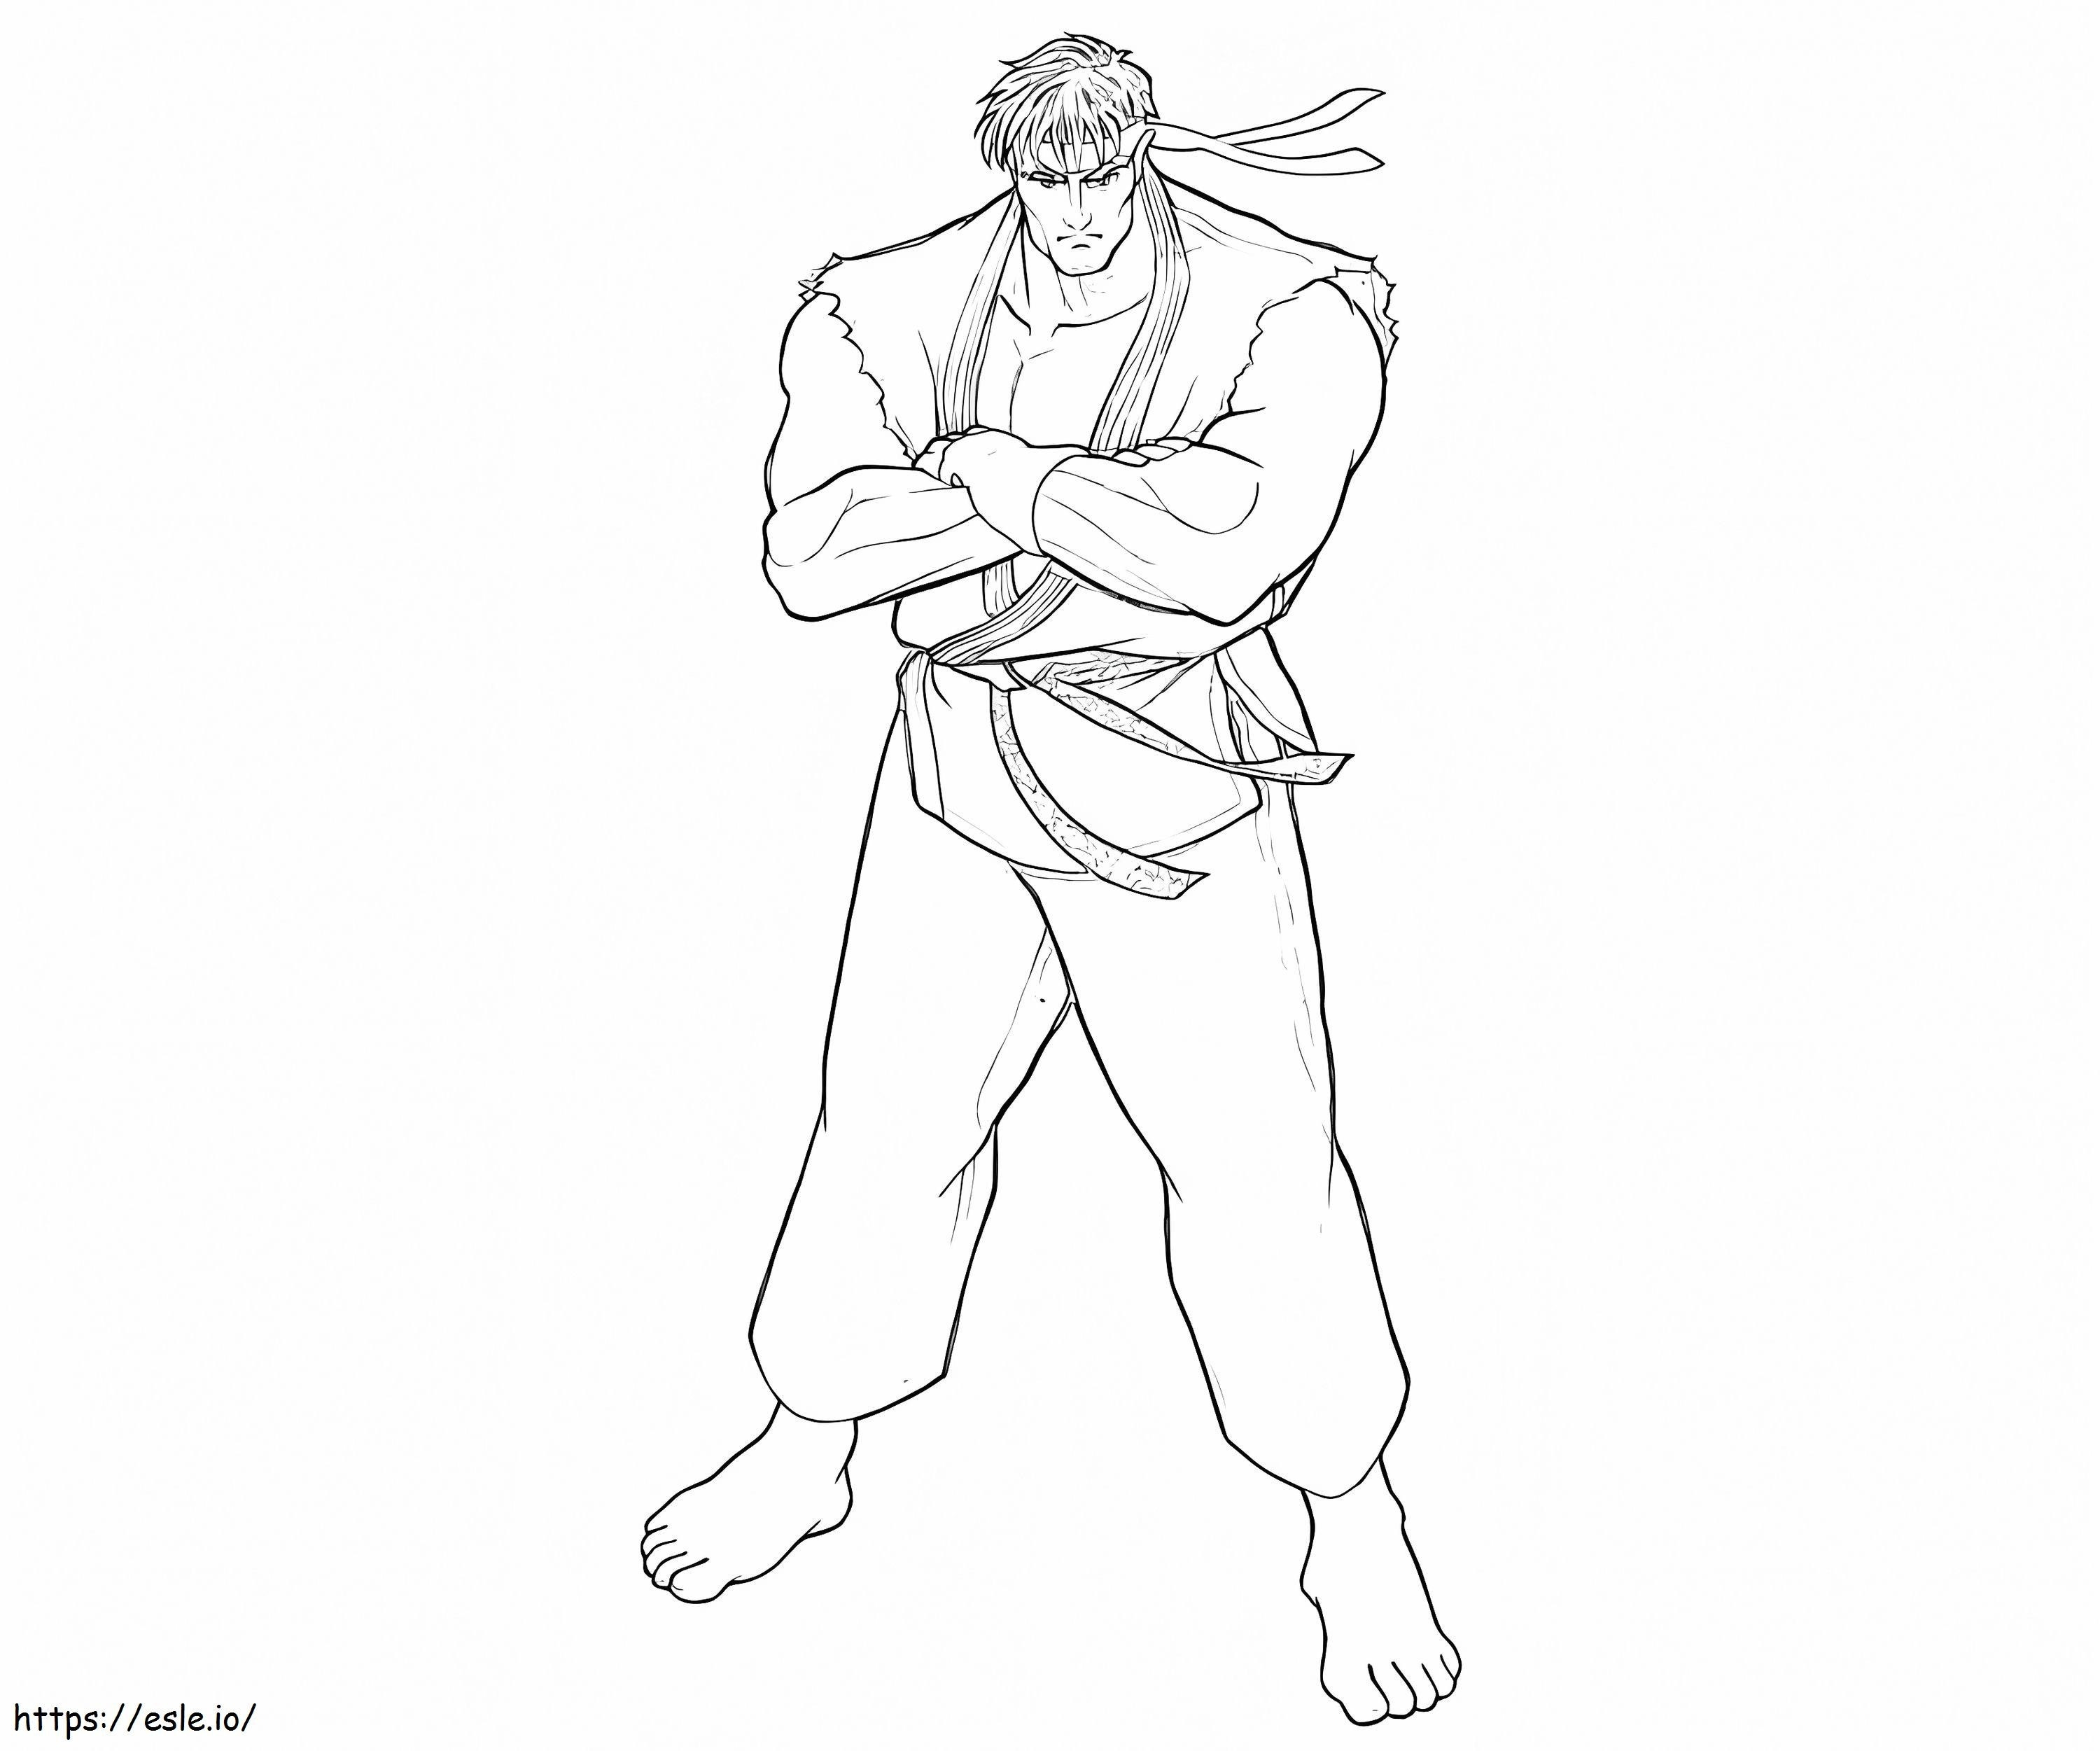 Free Ryu coloring page